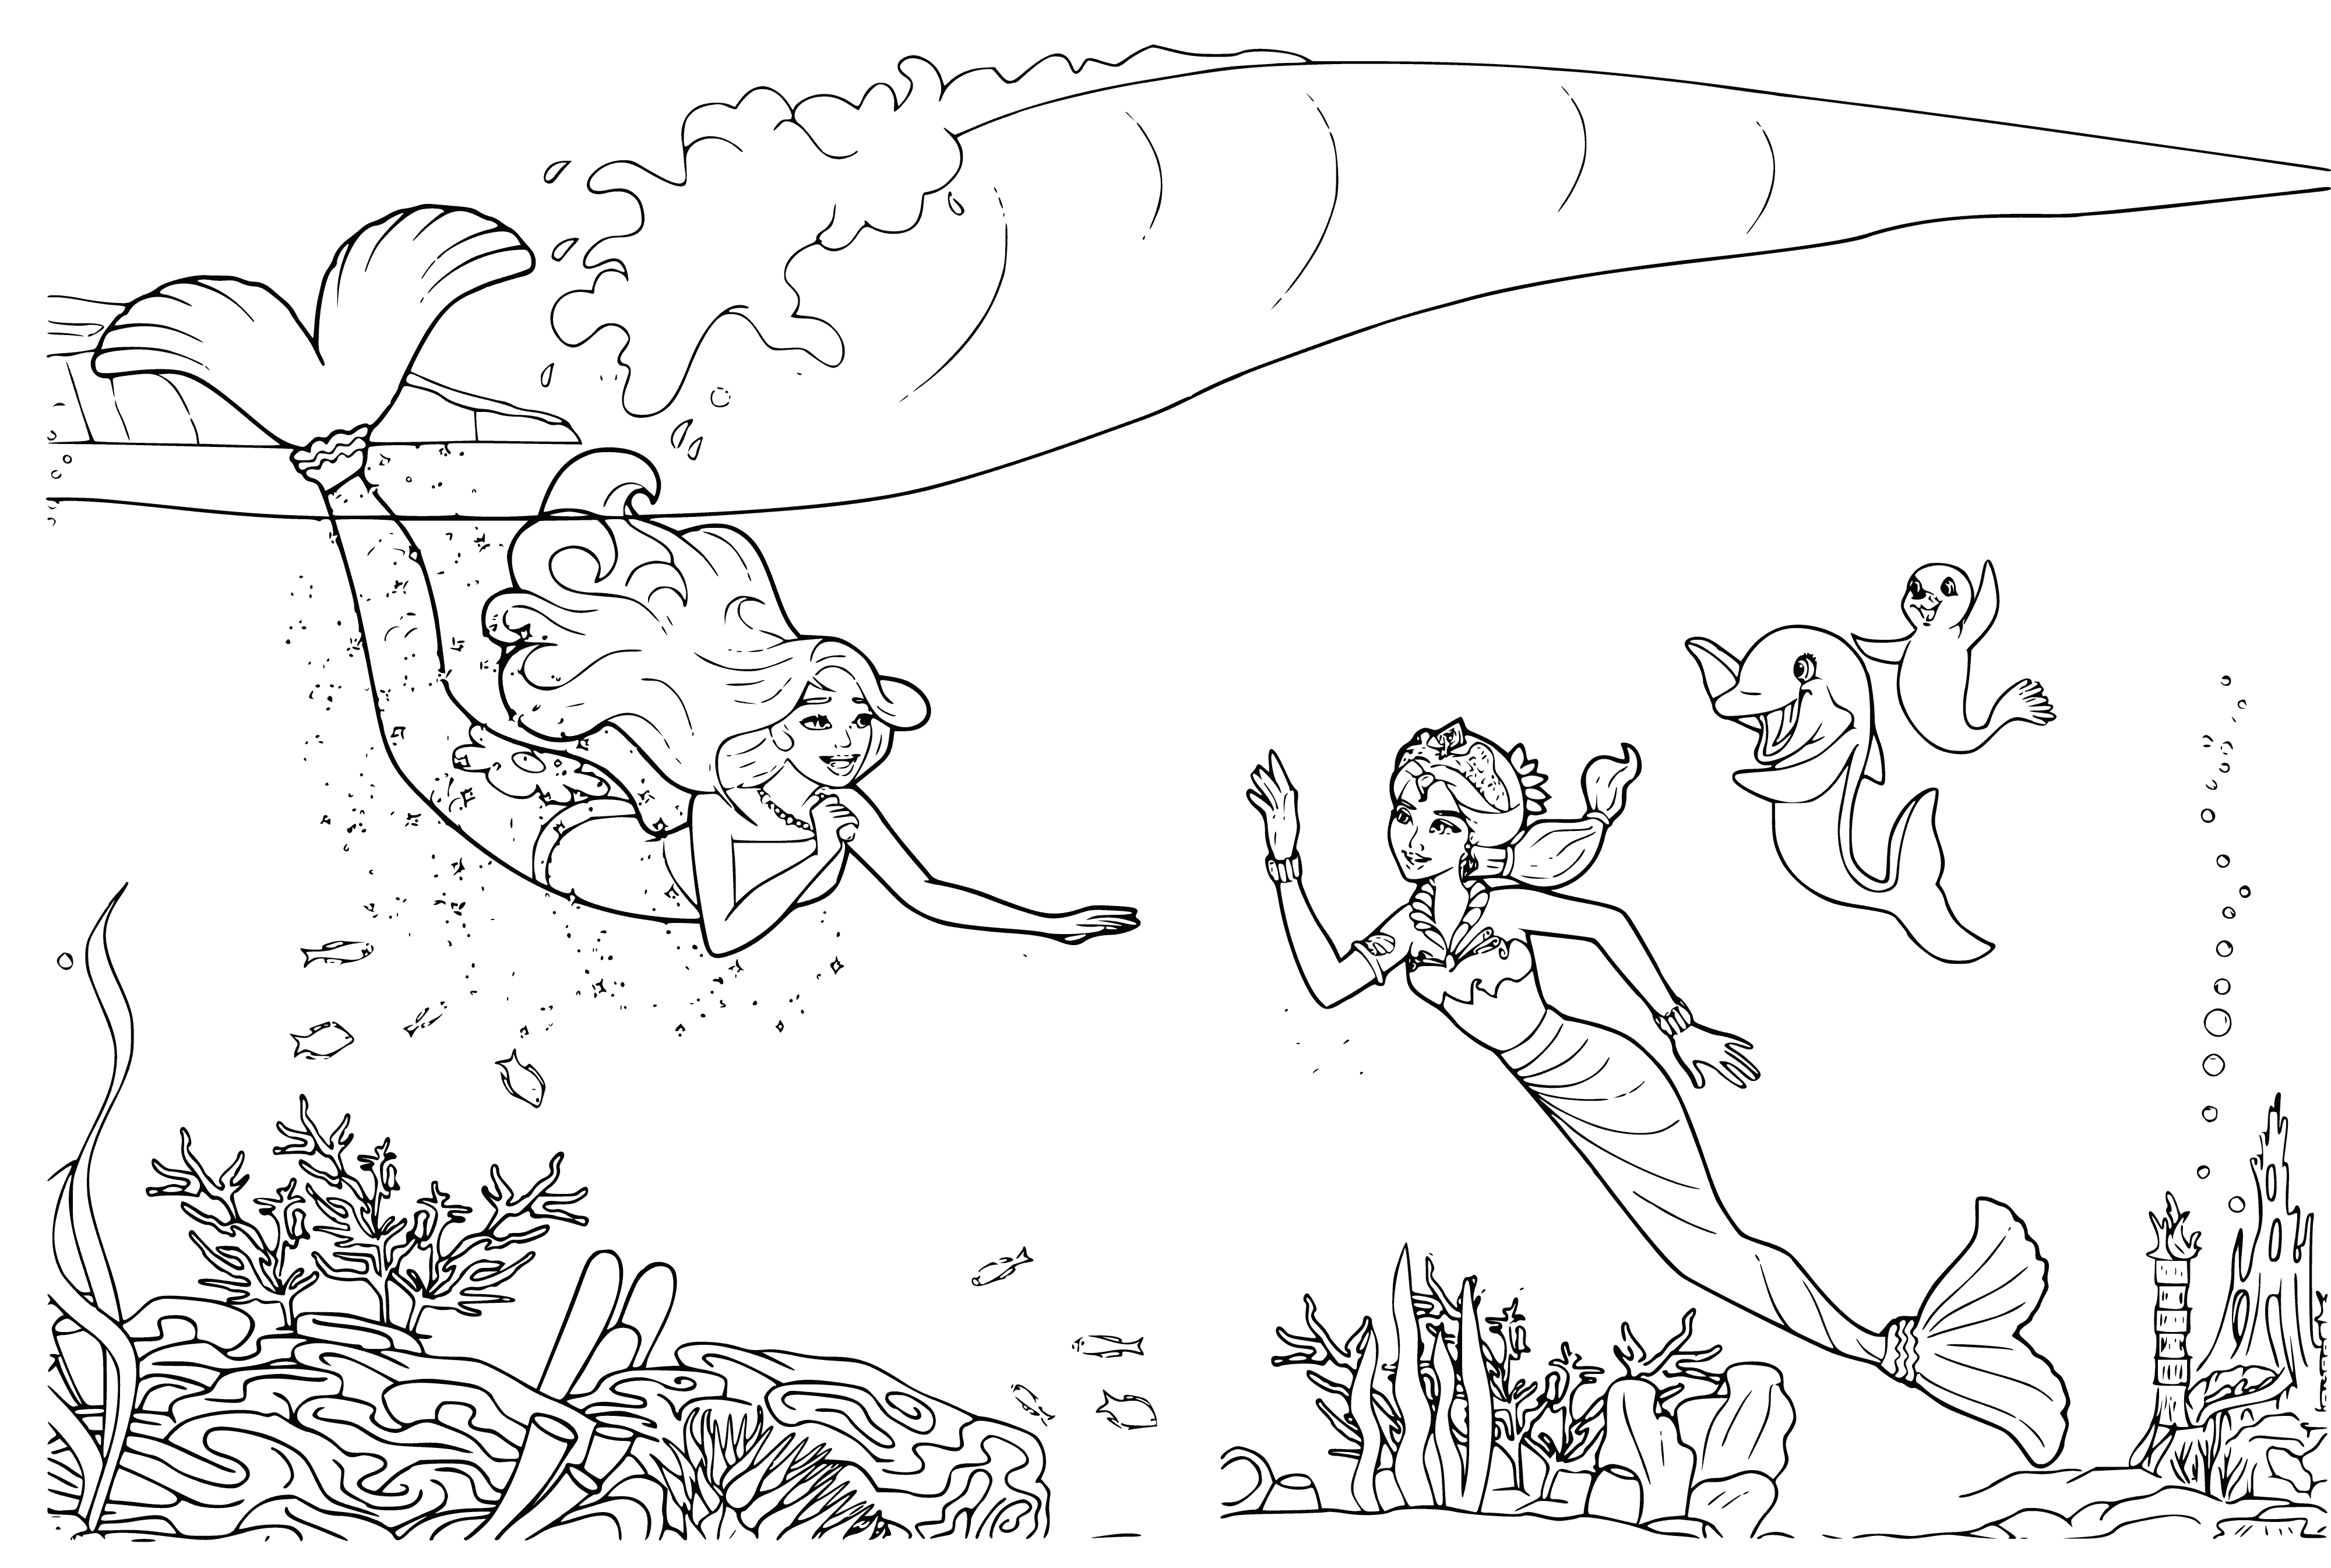 coloring page: Mermaids and sirens gather around a treasure chest, wearing bright dresses and with long hair. Some mermaids have fish tails, some sirens have wings. They open the chest, happy and excited.